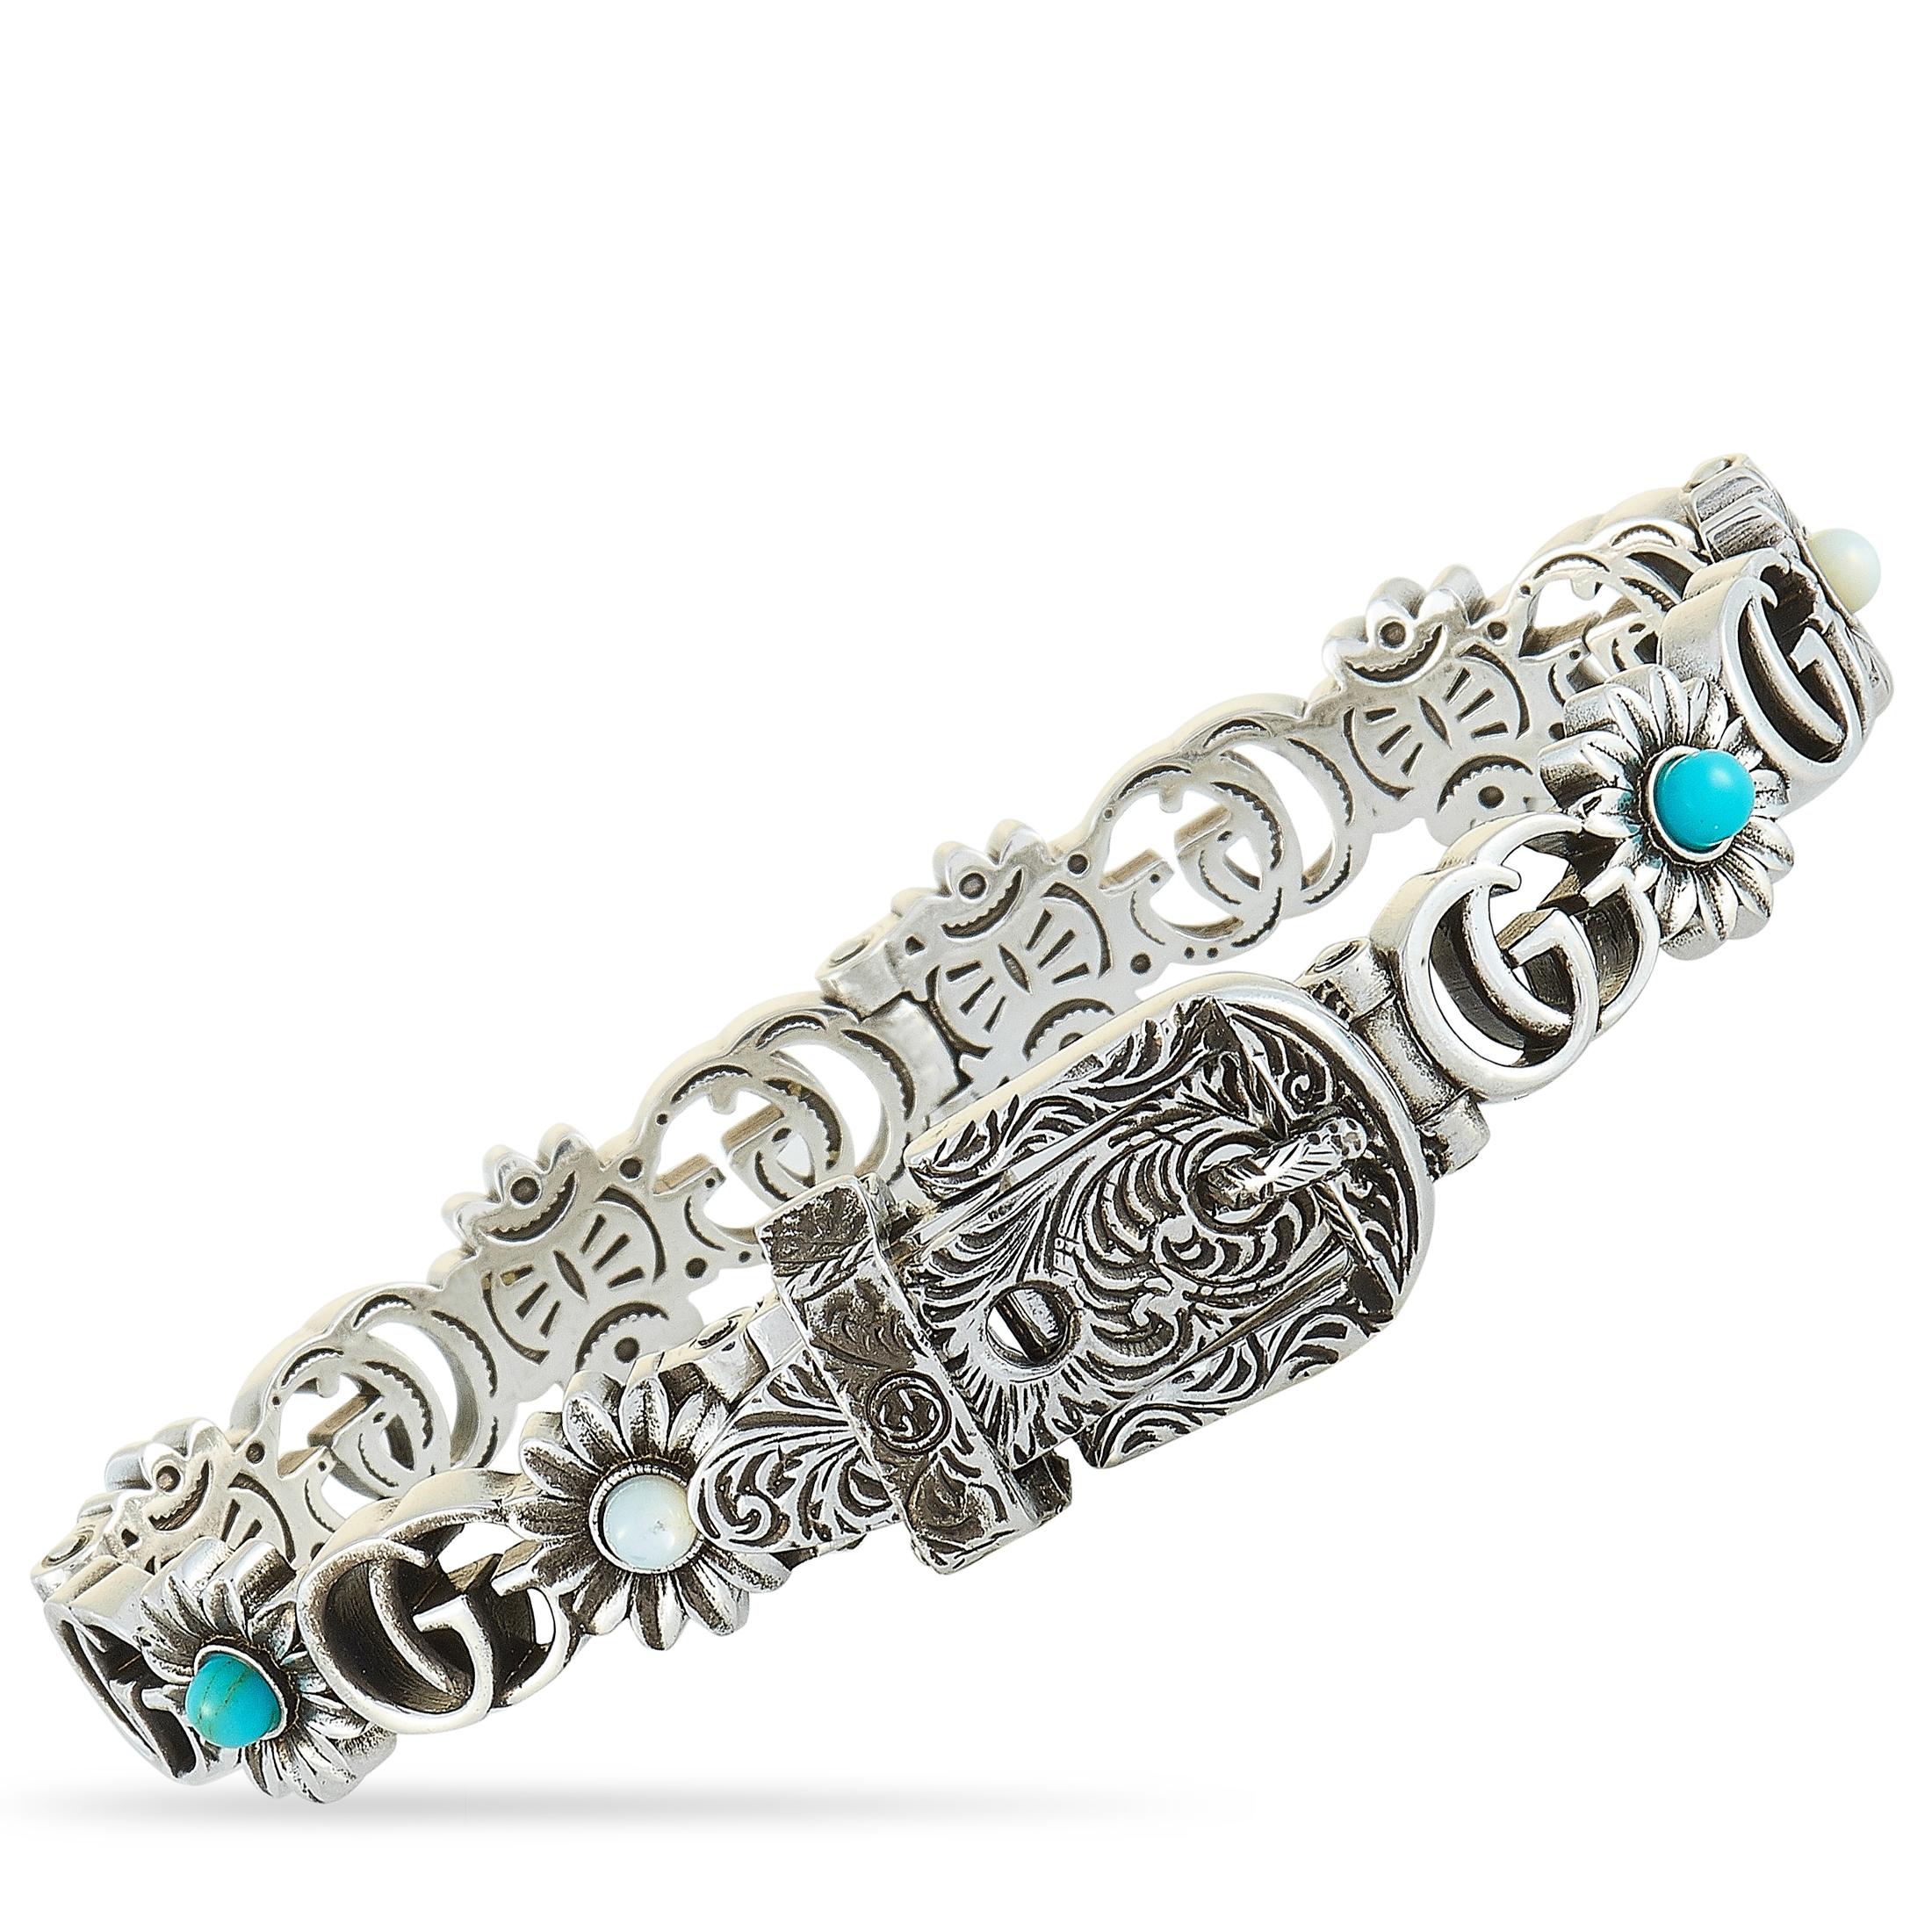 The Gucci “GG Marmont” bracelet is crafted from aged sterling silver and decorated with turquoise resin, topaz, and mother of pearl. The bracelet weighs 33 grams and measures 6.50” in length.
 
 This item is offered in brand new condition and